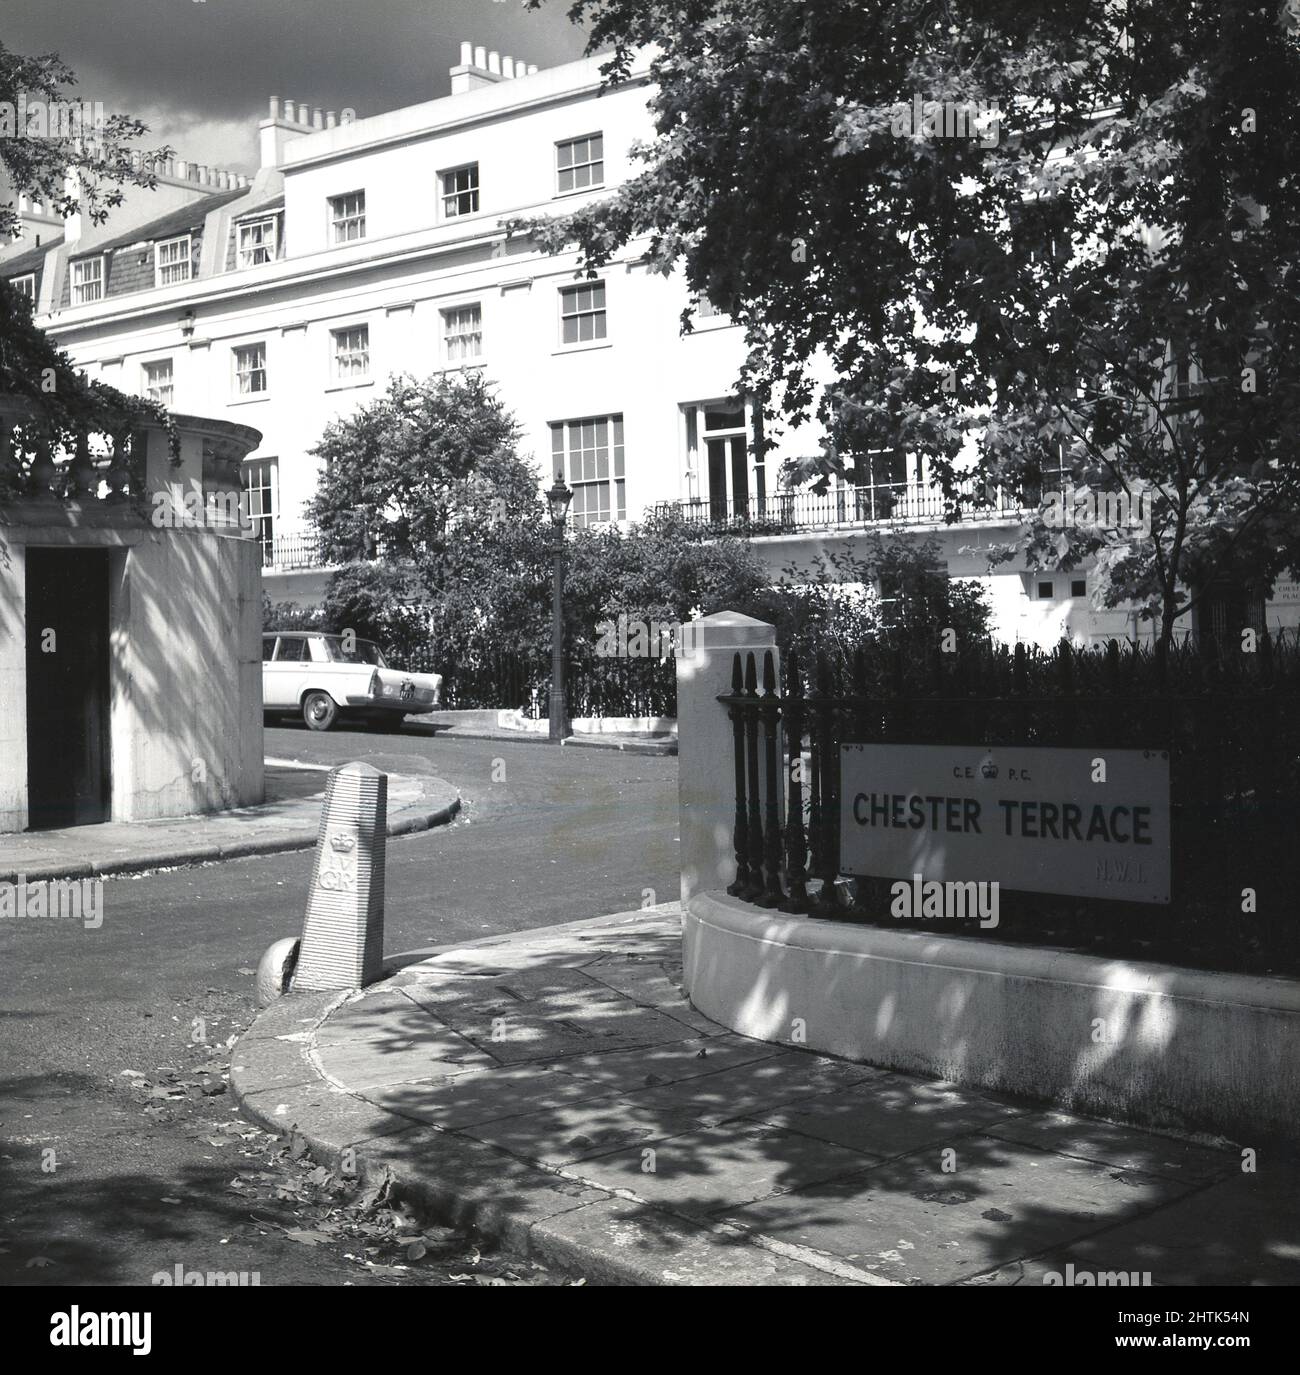 1960s, historical, view of Chester Terrace, NW1, London, England, UK. Seen here a segement of the terrace of neo-classical houses, significant because it has the longest unbroken facade in Regents Park. On the street sign, the letters C.E, P.C and the crown emblem, indicating that the freeholder of the properties is the Crown Estate, a historic collection of land and properties belonging to the British Monarchy and one of the biggest property mangement companies in the UK. Stock Photo